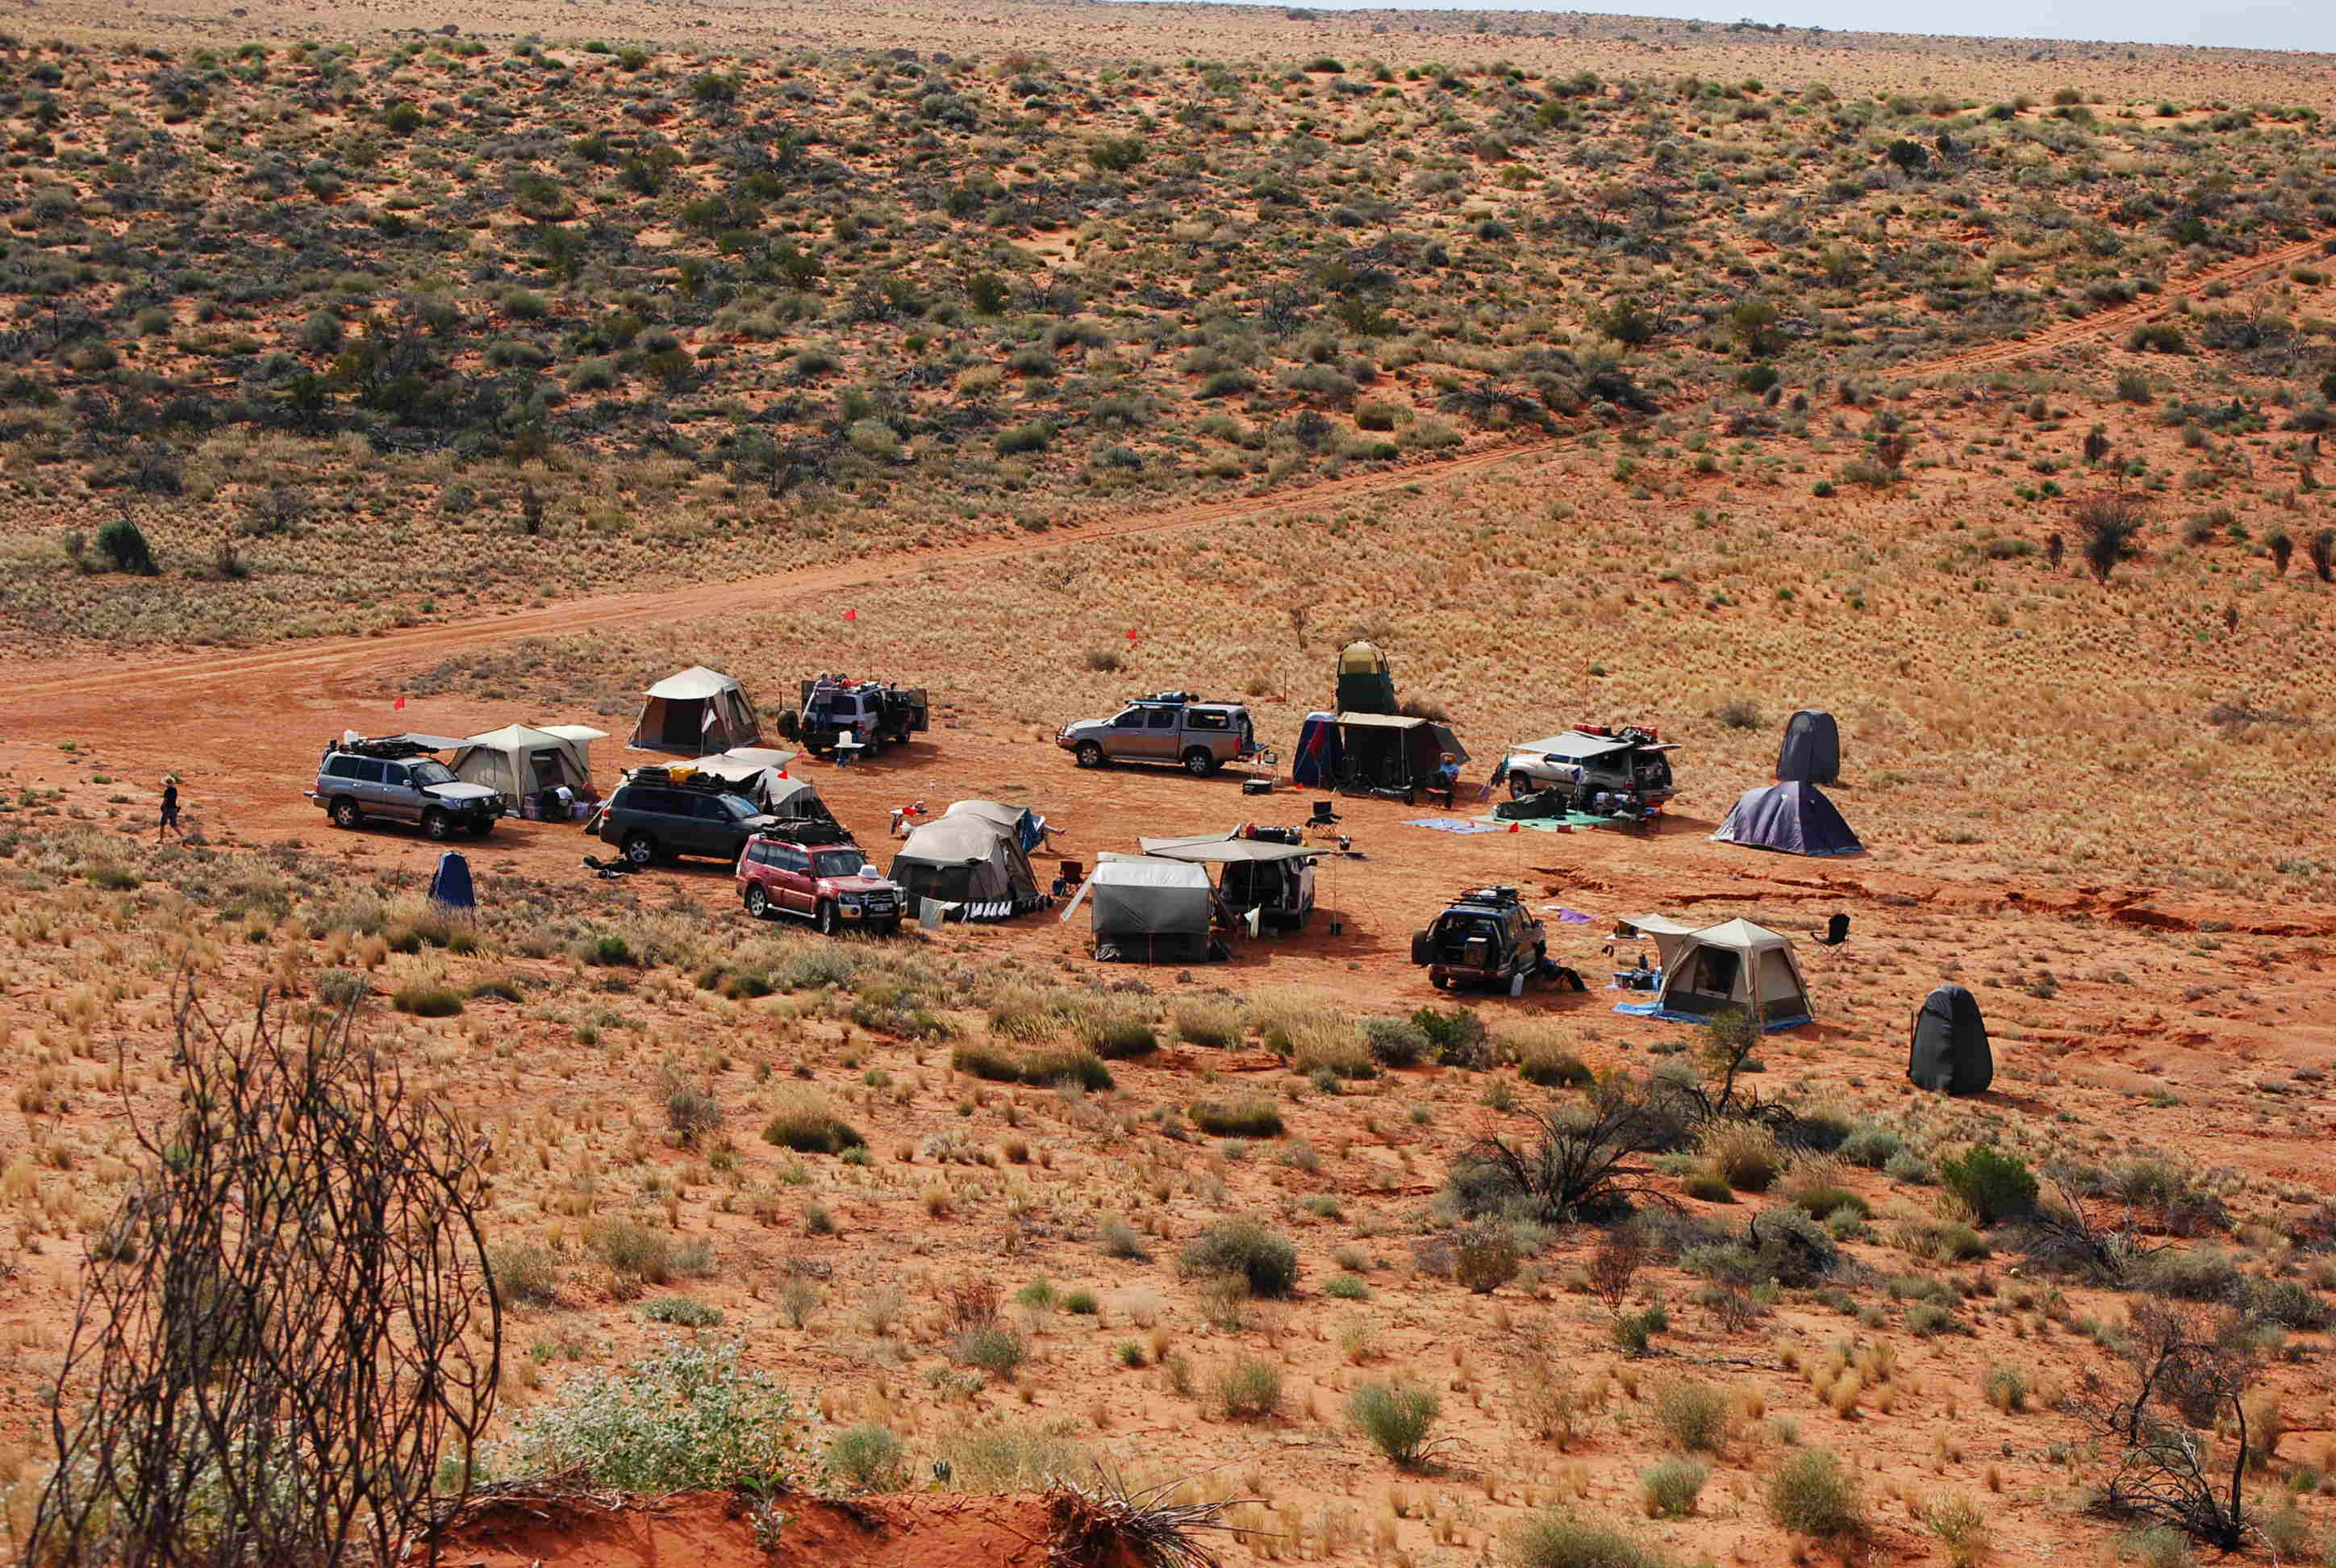 Simpson Desert High Quality Background on Wallpapers Vista